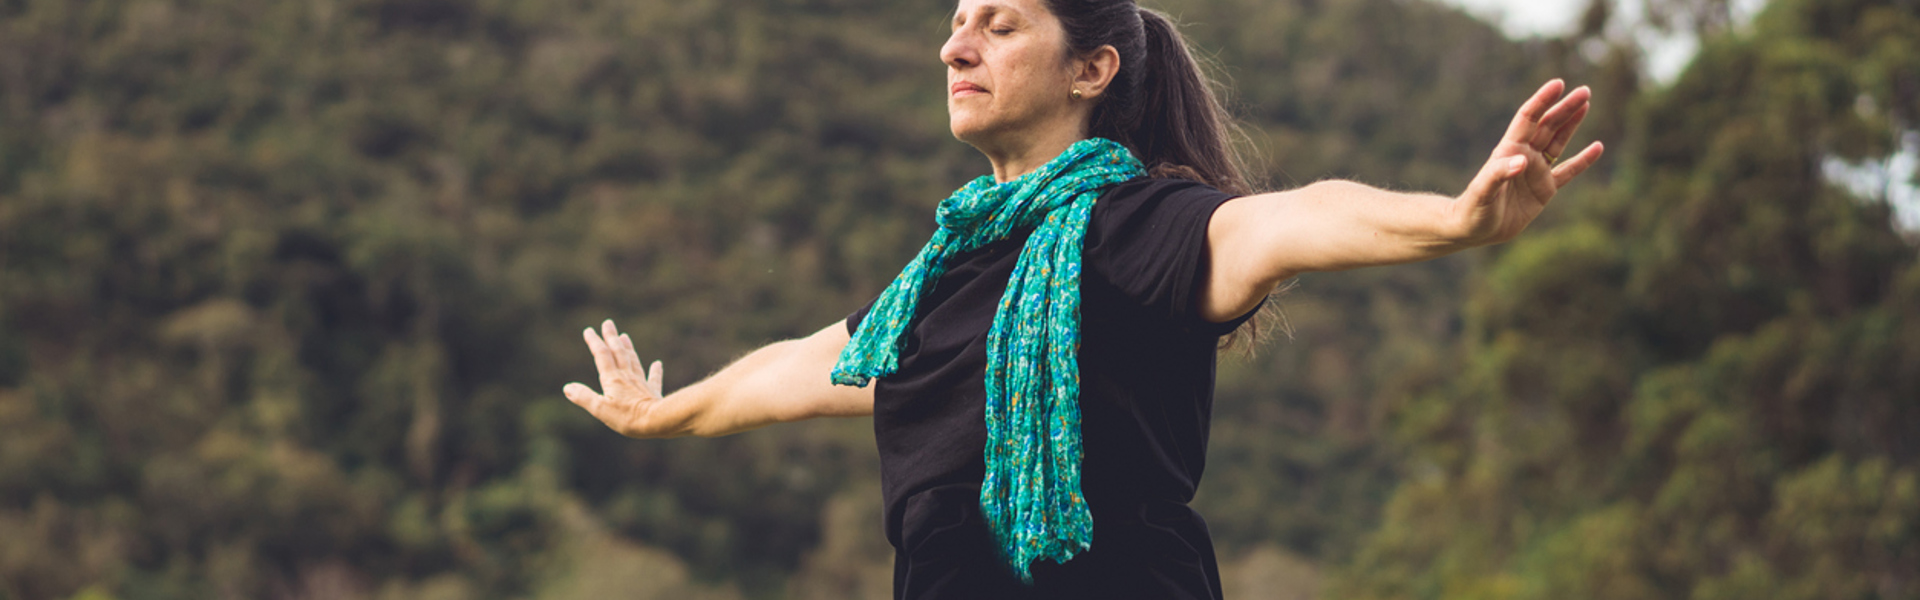 a woman wearing a blue scarf doing Qi Gong in nature